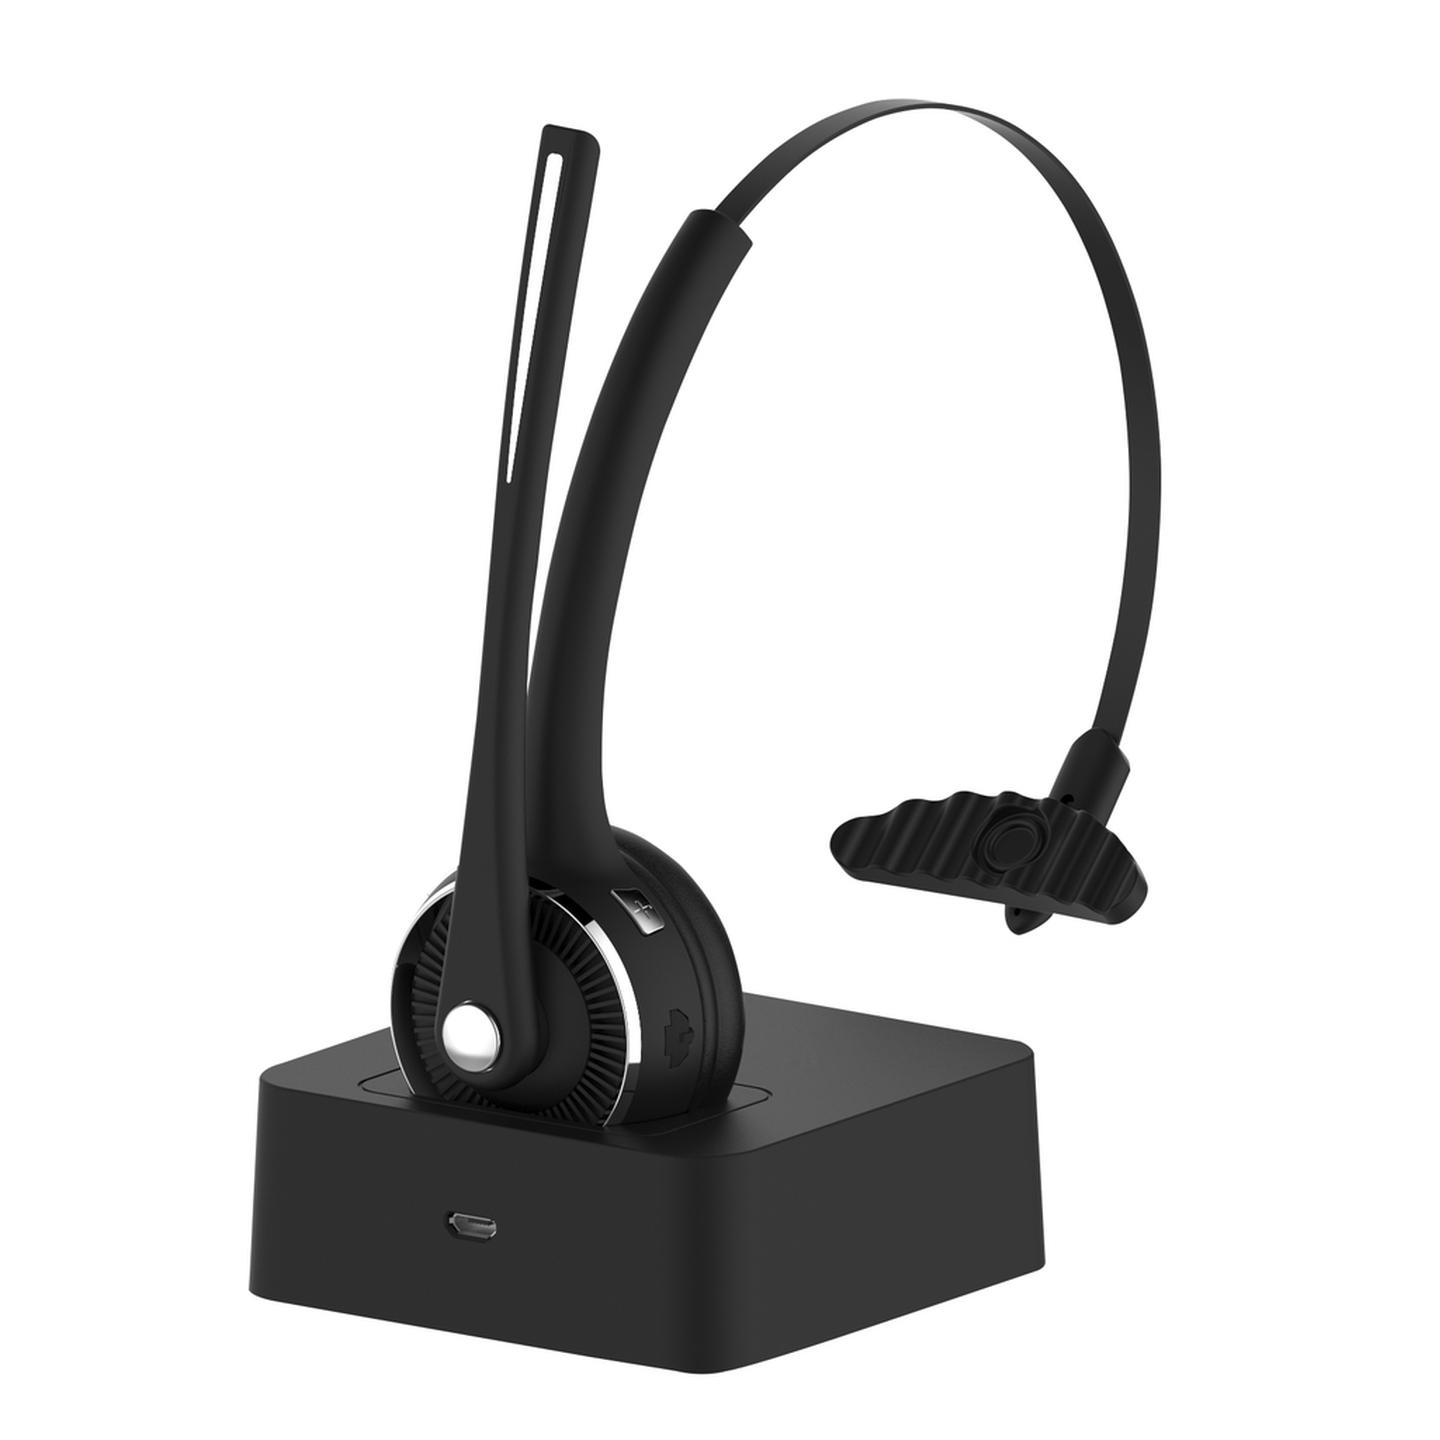 Digitech Rechargeable Bluetooth 5.0 Headset with Charging Cradle